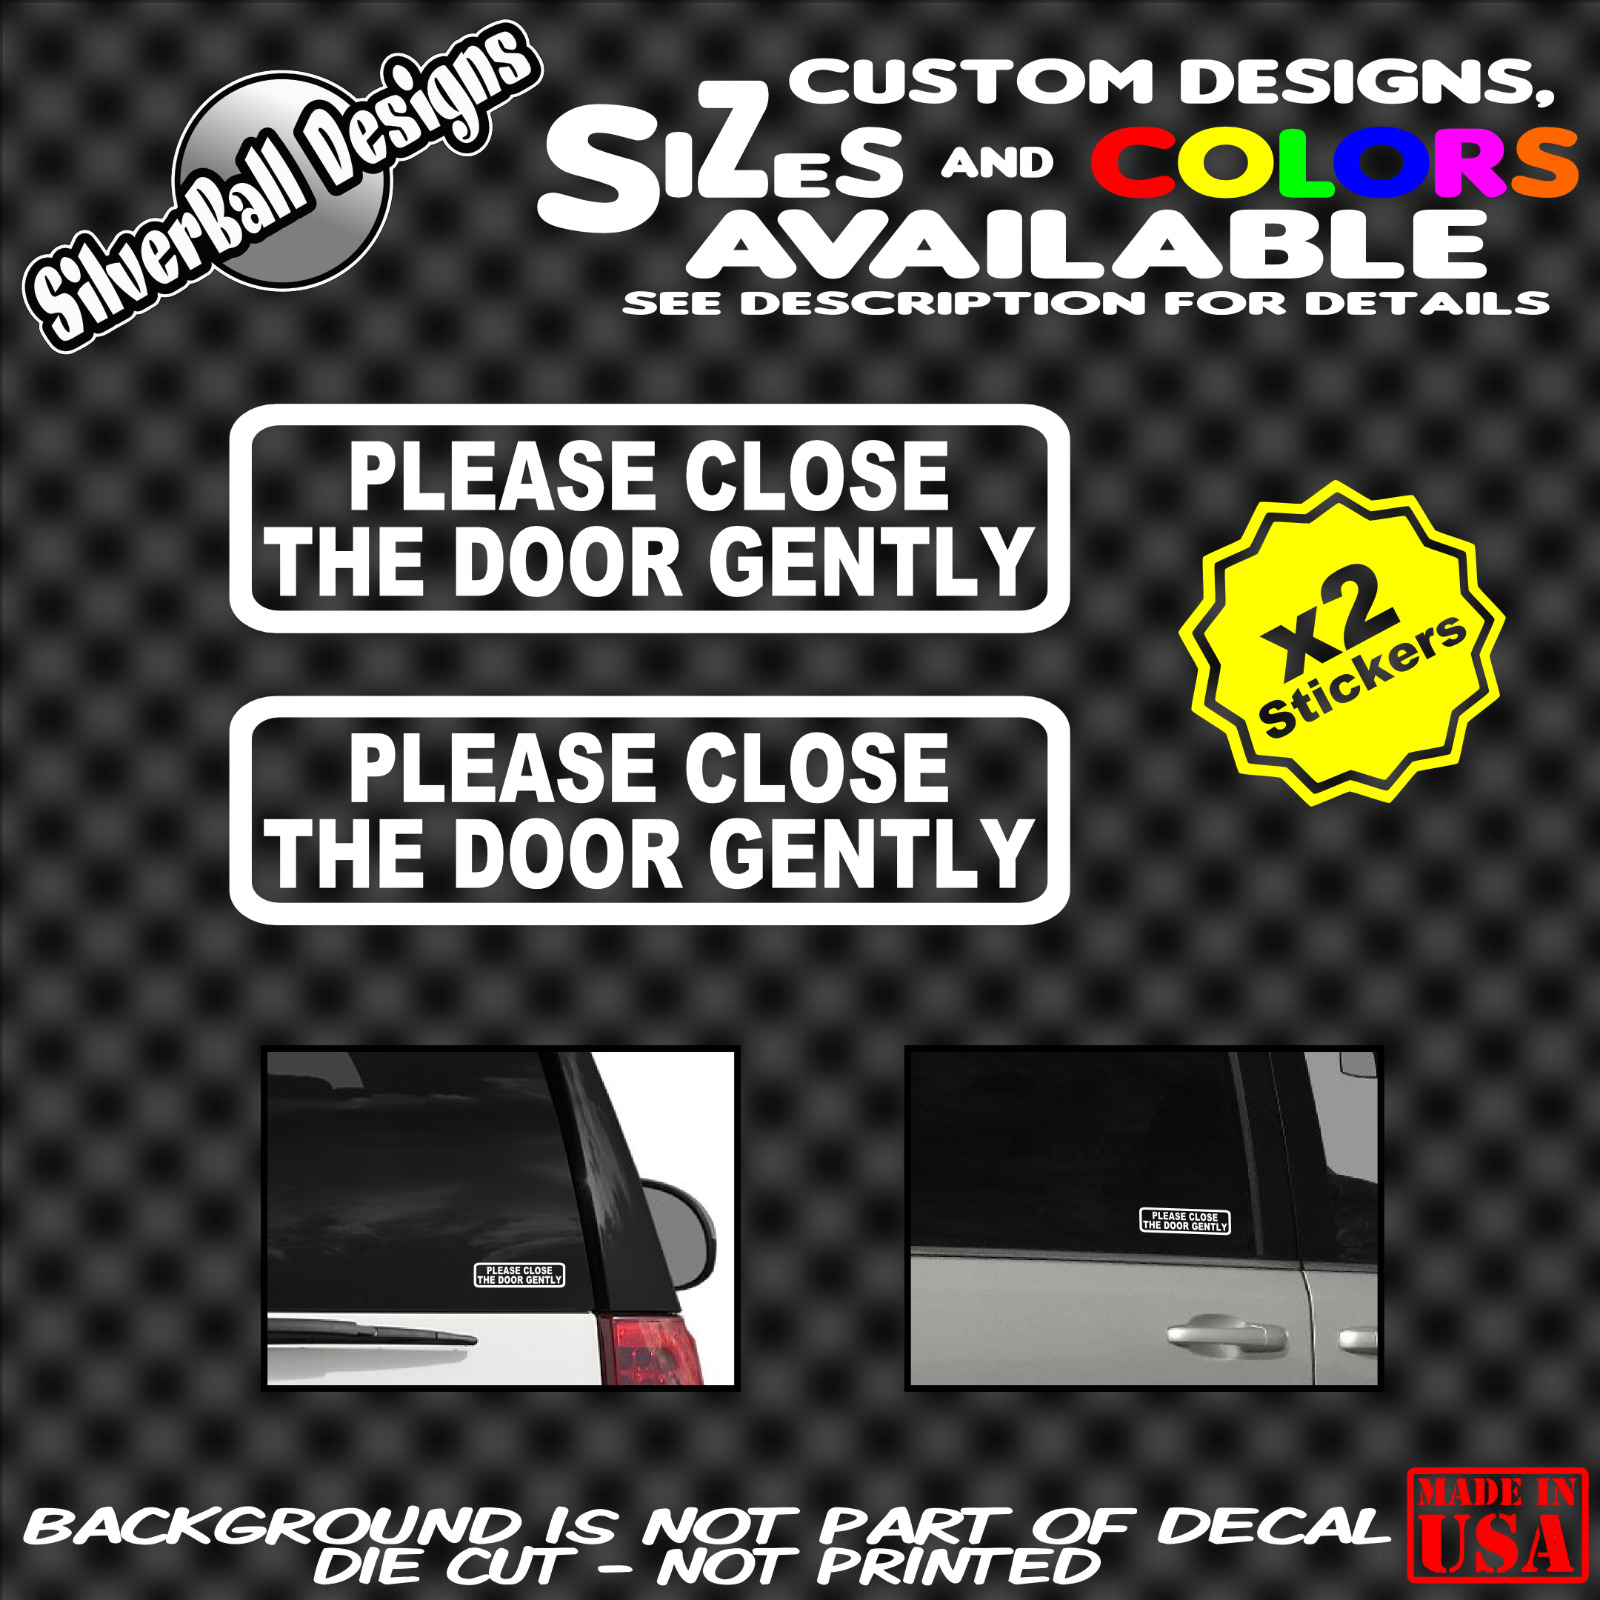 Please Close the Door Gently Window Car Truck Apartment Business Sticker Decal 